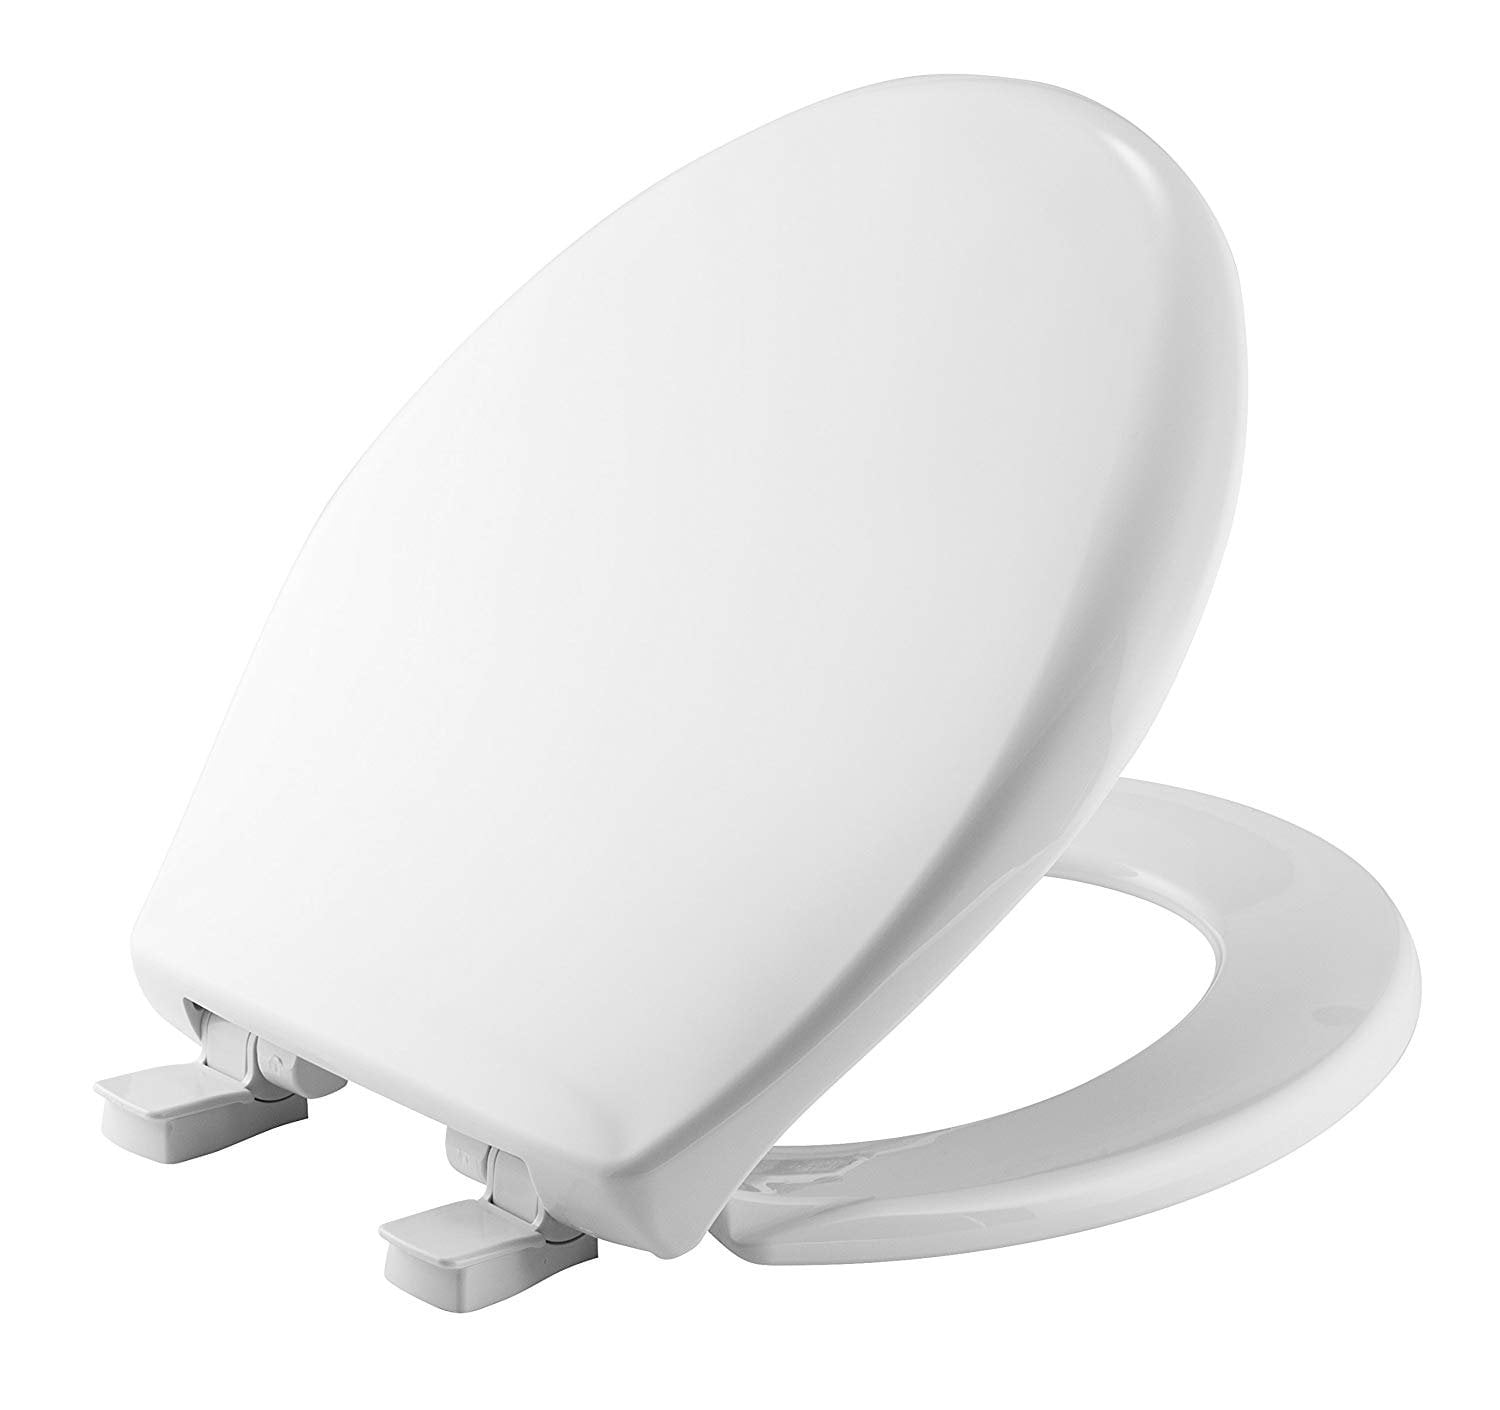 ROUND Durable Enameled MAYFAIR Toilet Seat will Slow Close and Never Loosen 